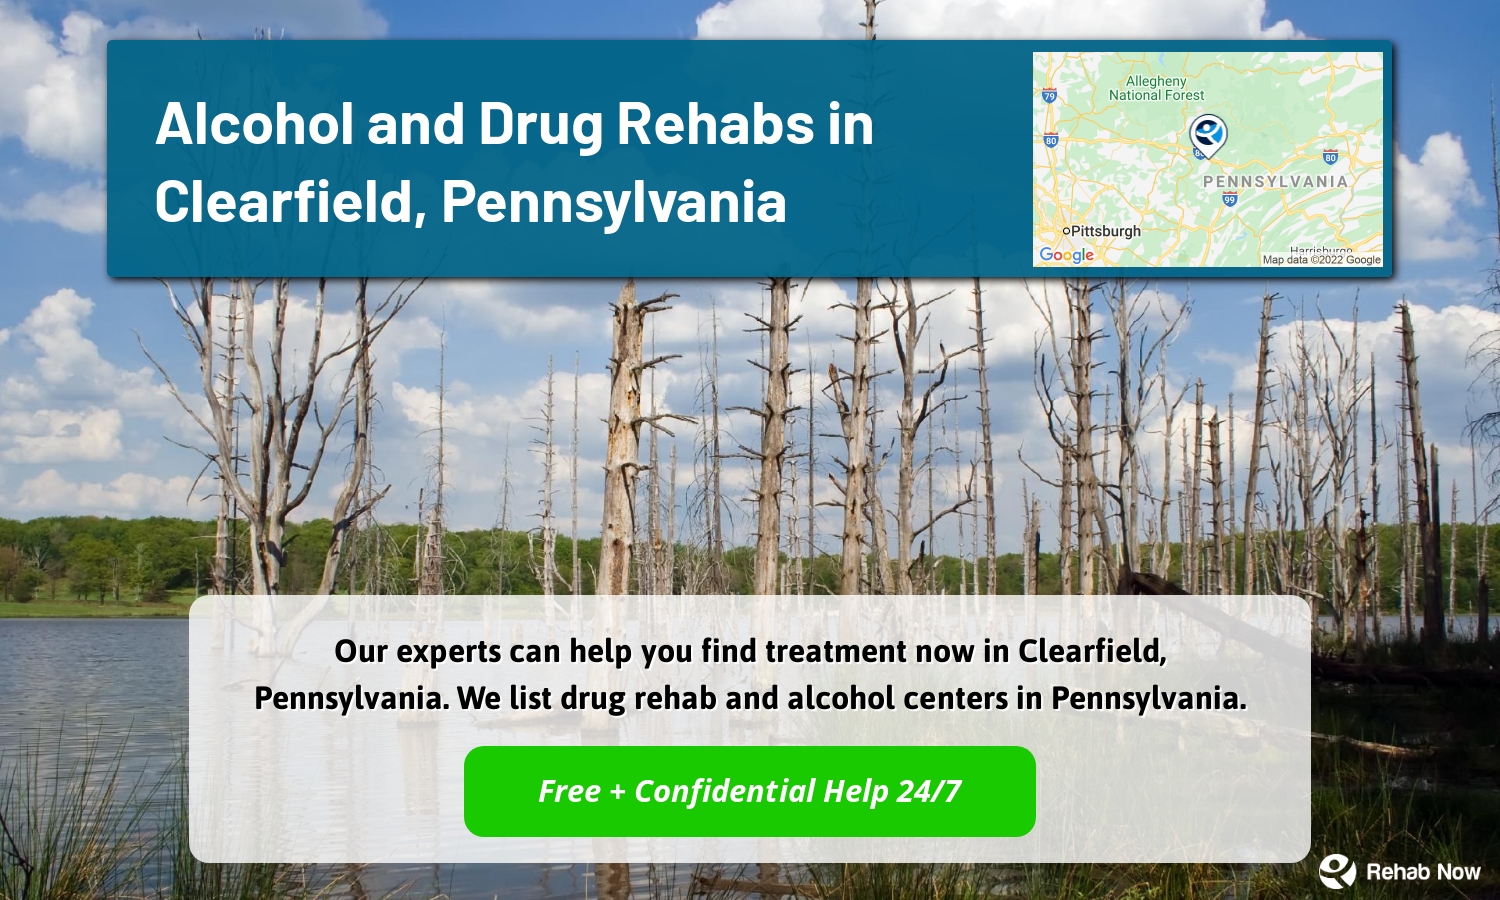 Our experts can help you find treatment now in Clearfield, Pennsylvania. We list drug rehab and alcohol centers in Pennsylvania.